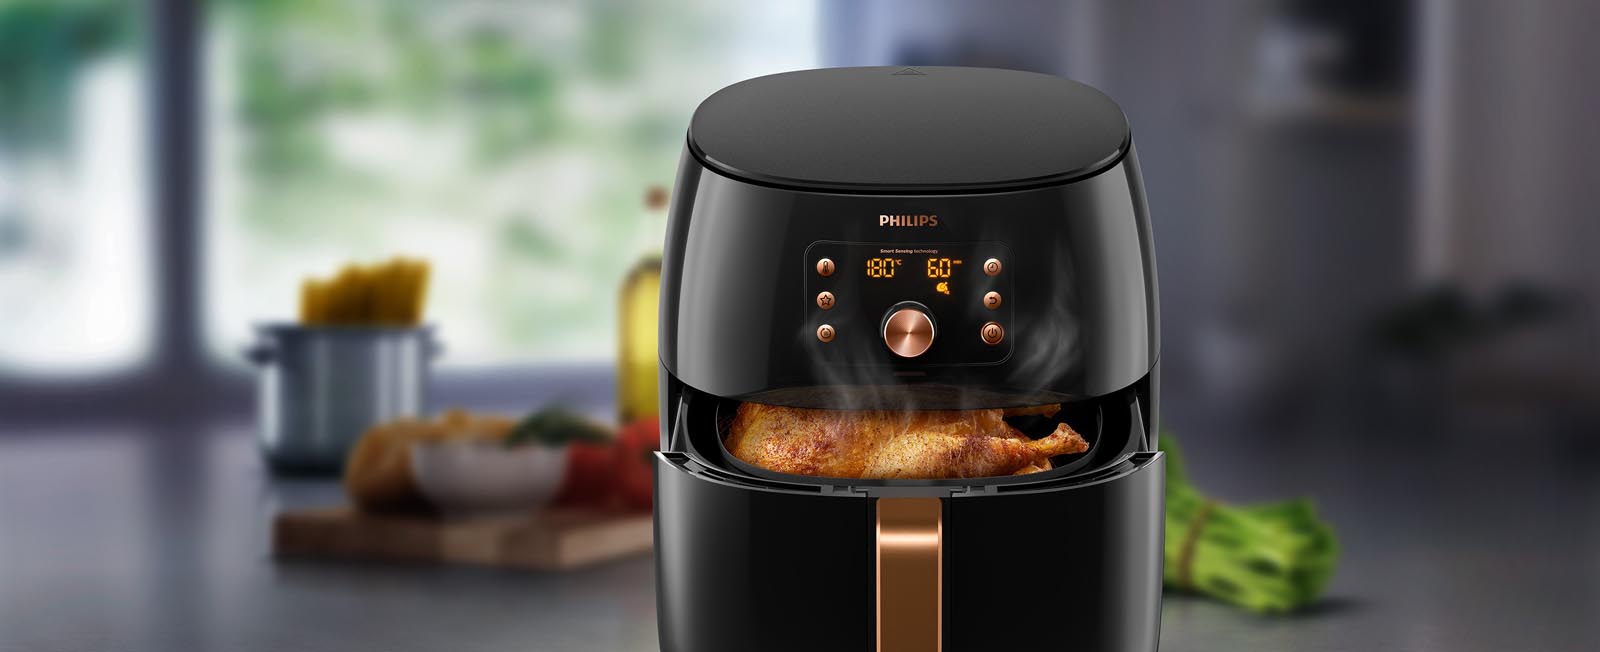 finish water the flower Ban Philips Smart XXL Airfryer Review + 10 Easy Airfryer Recipes | Harvey  Norman Australia